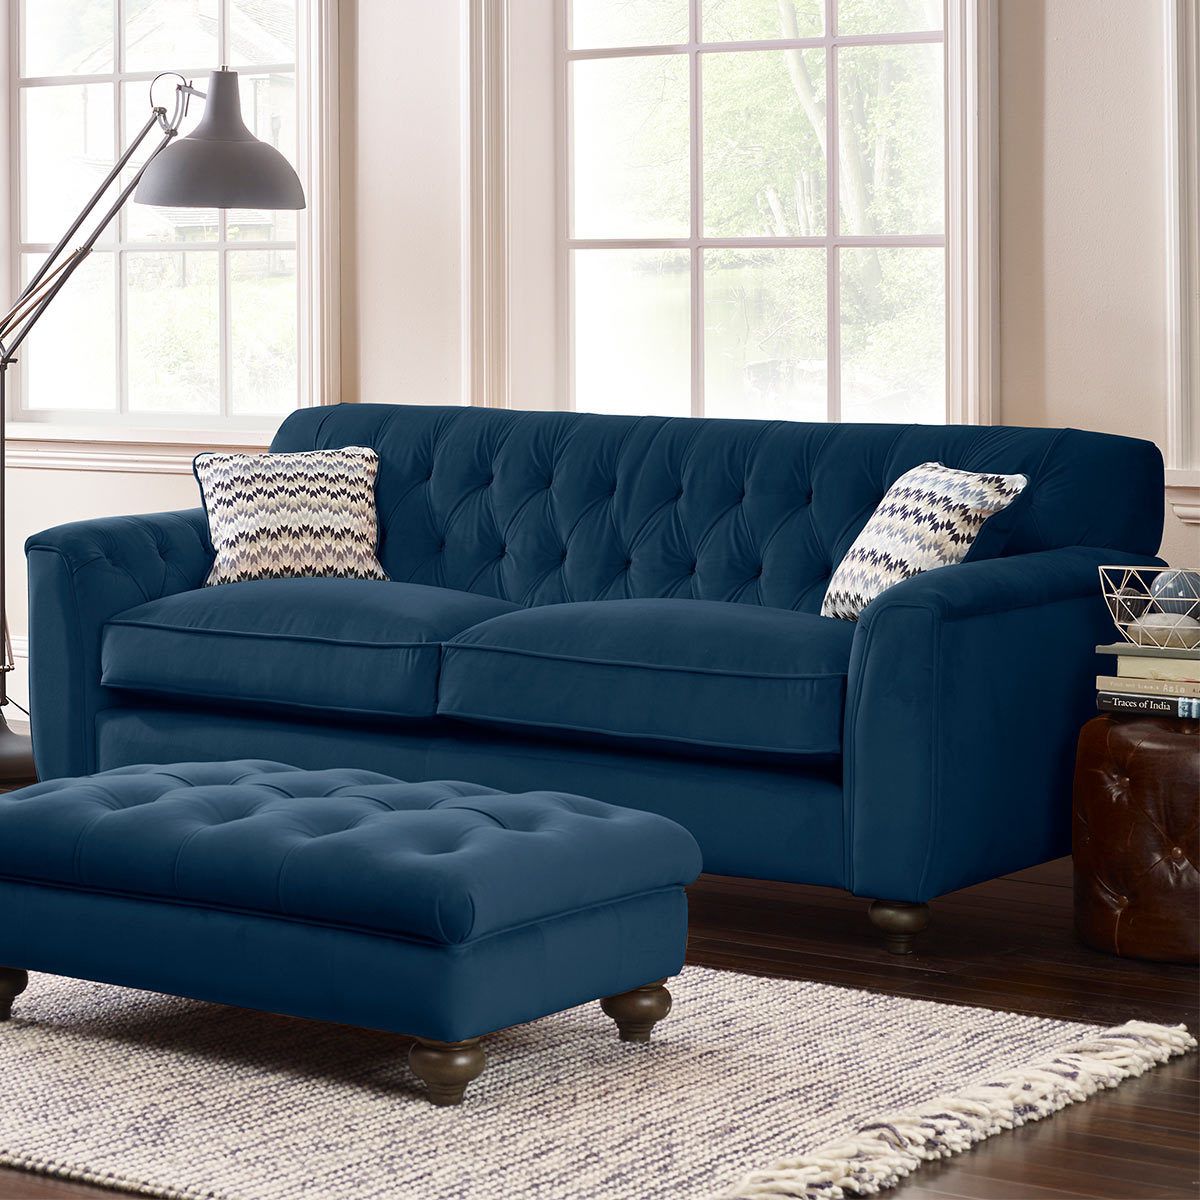 Avante Button Back 4 Seater Velvet Sofa With 2 Accent With Regard To Lyvia Pillowback Sofa Sectional Sofas (View 3 of 15)